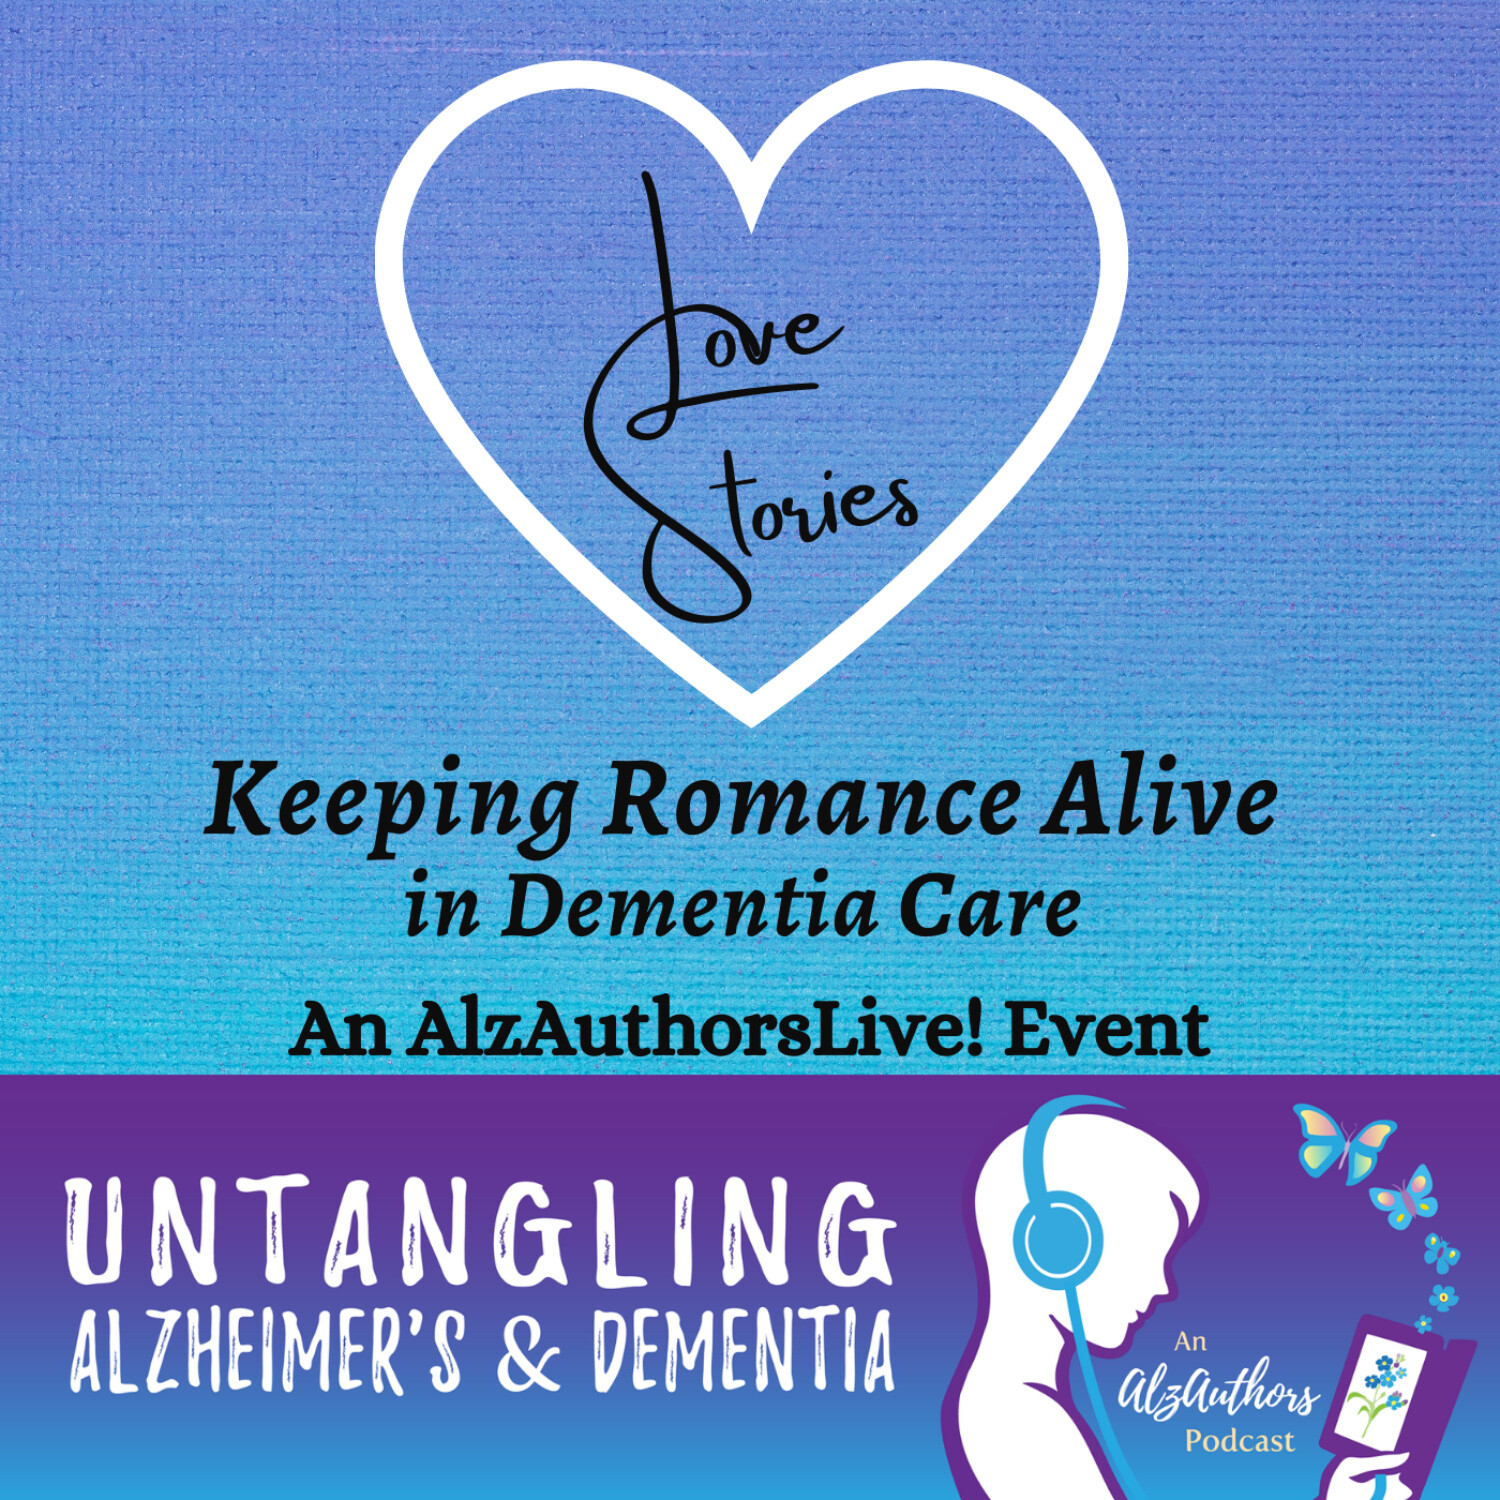 REPLAY Live Q&A – Love Stories: Keeping Romance Alive in Dementia Care